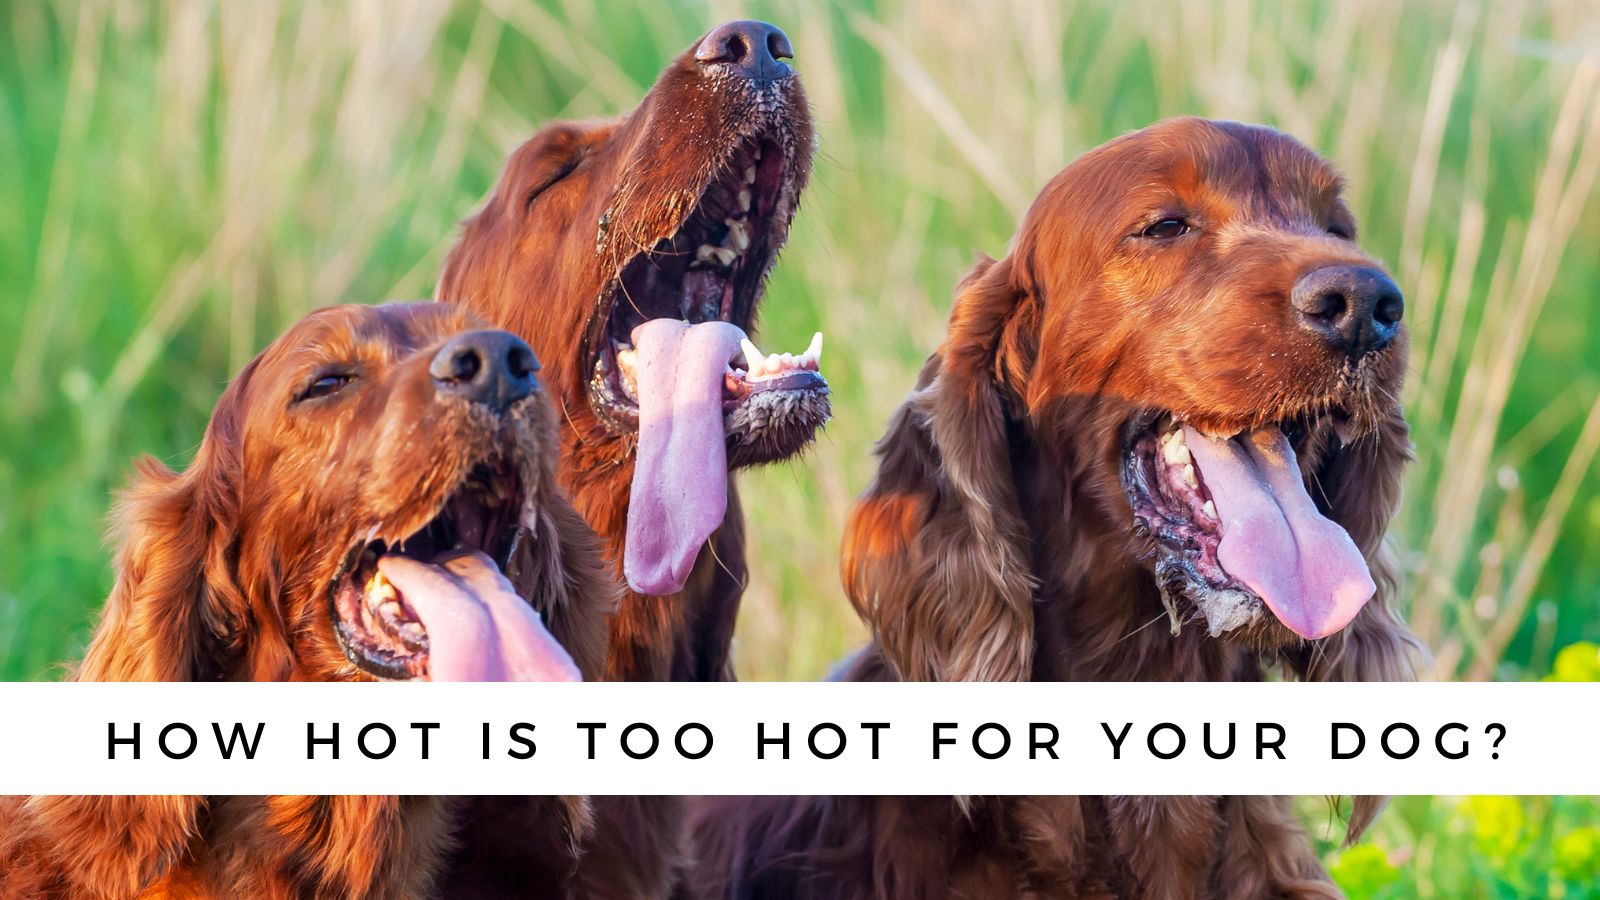 when dogs are in heat how long does it last